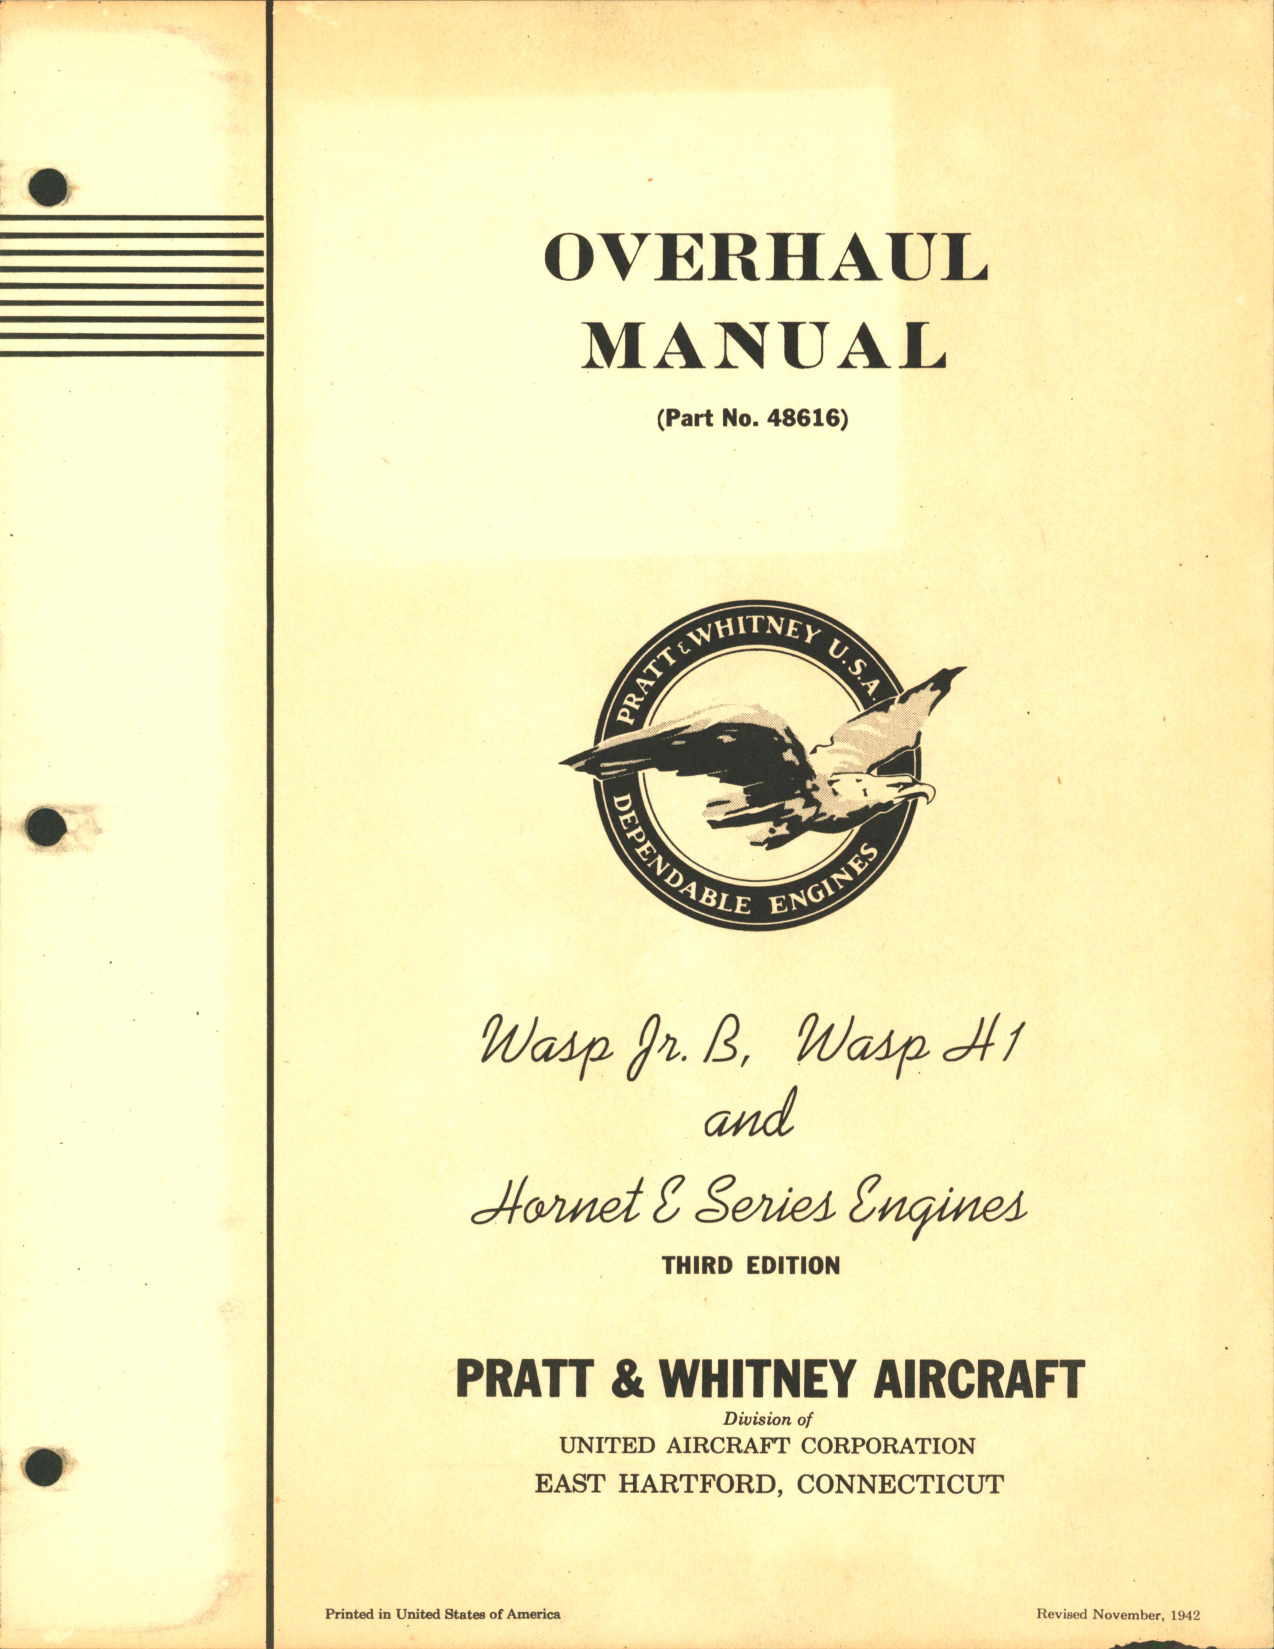 Sample page 3 from AirCorps Library document: Ovh Manual for Wasp Jr B, Wasp H1 and Hornet E Series Engines